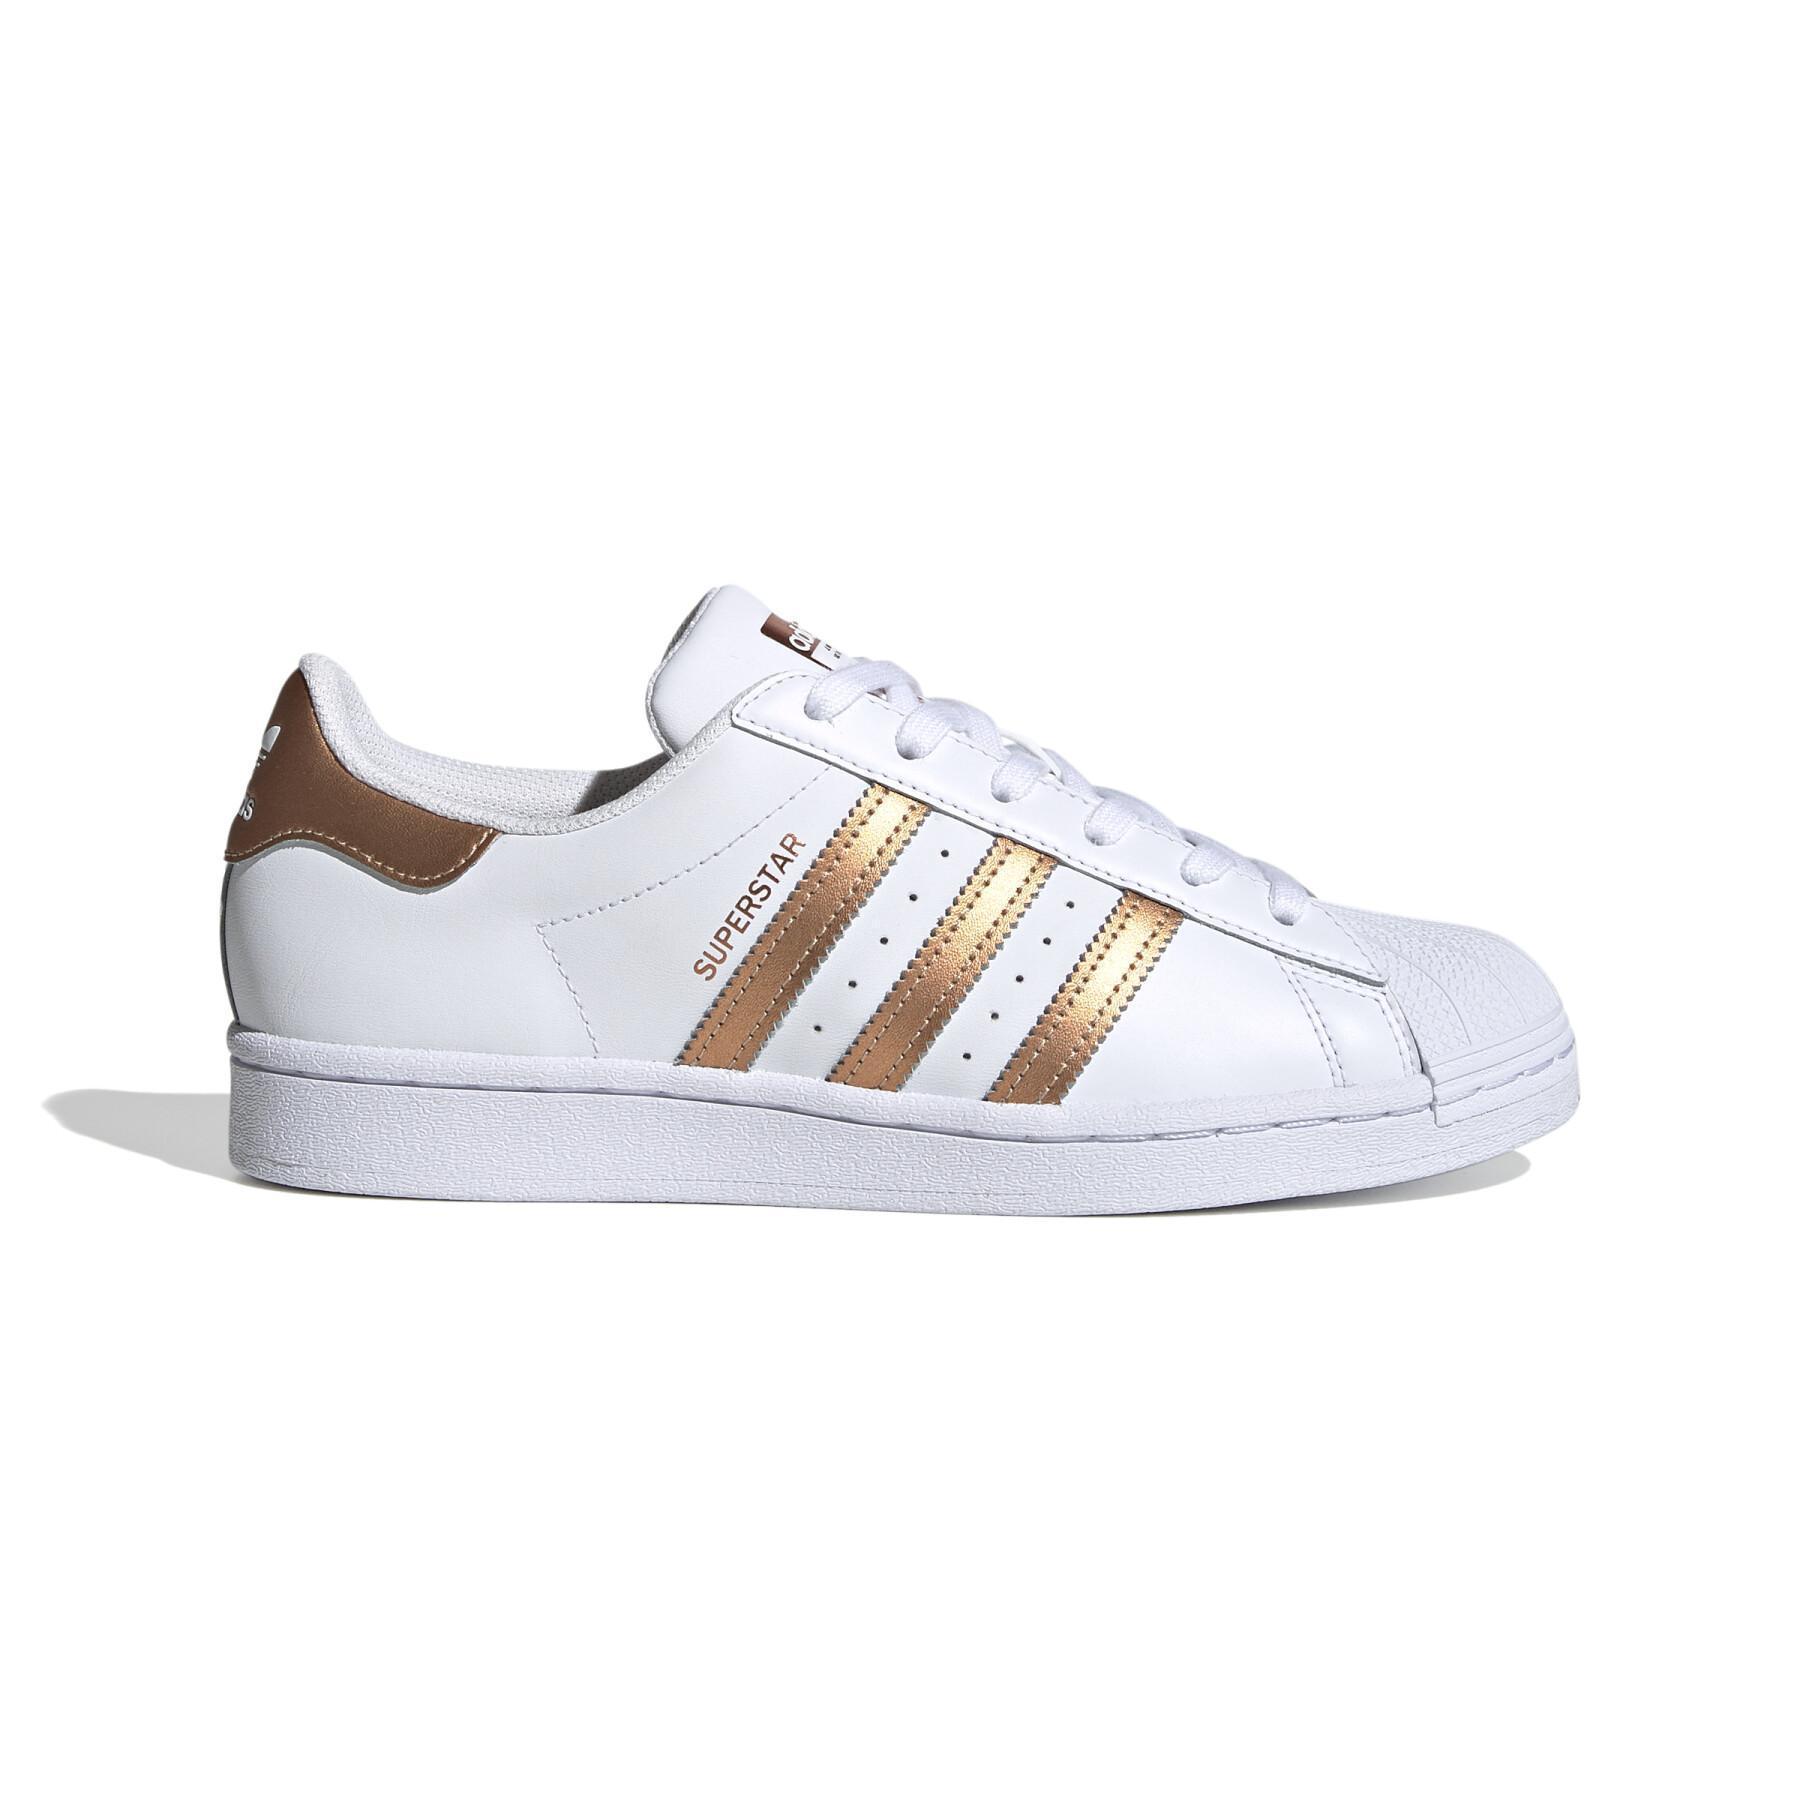 https://media.handball-store.fr/catalog/product/cache/image/1800x/9df78eab33525d08d6e5fb8d27136e95/a/d/adidas-originals_fx7484_1_footwear_photography_side_lateral_center_view_white_000.jpg